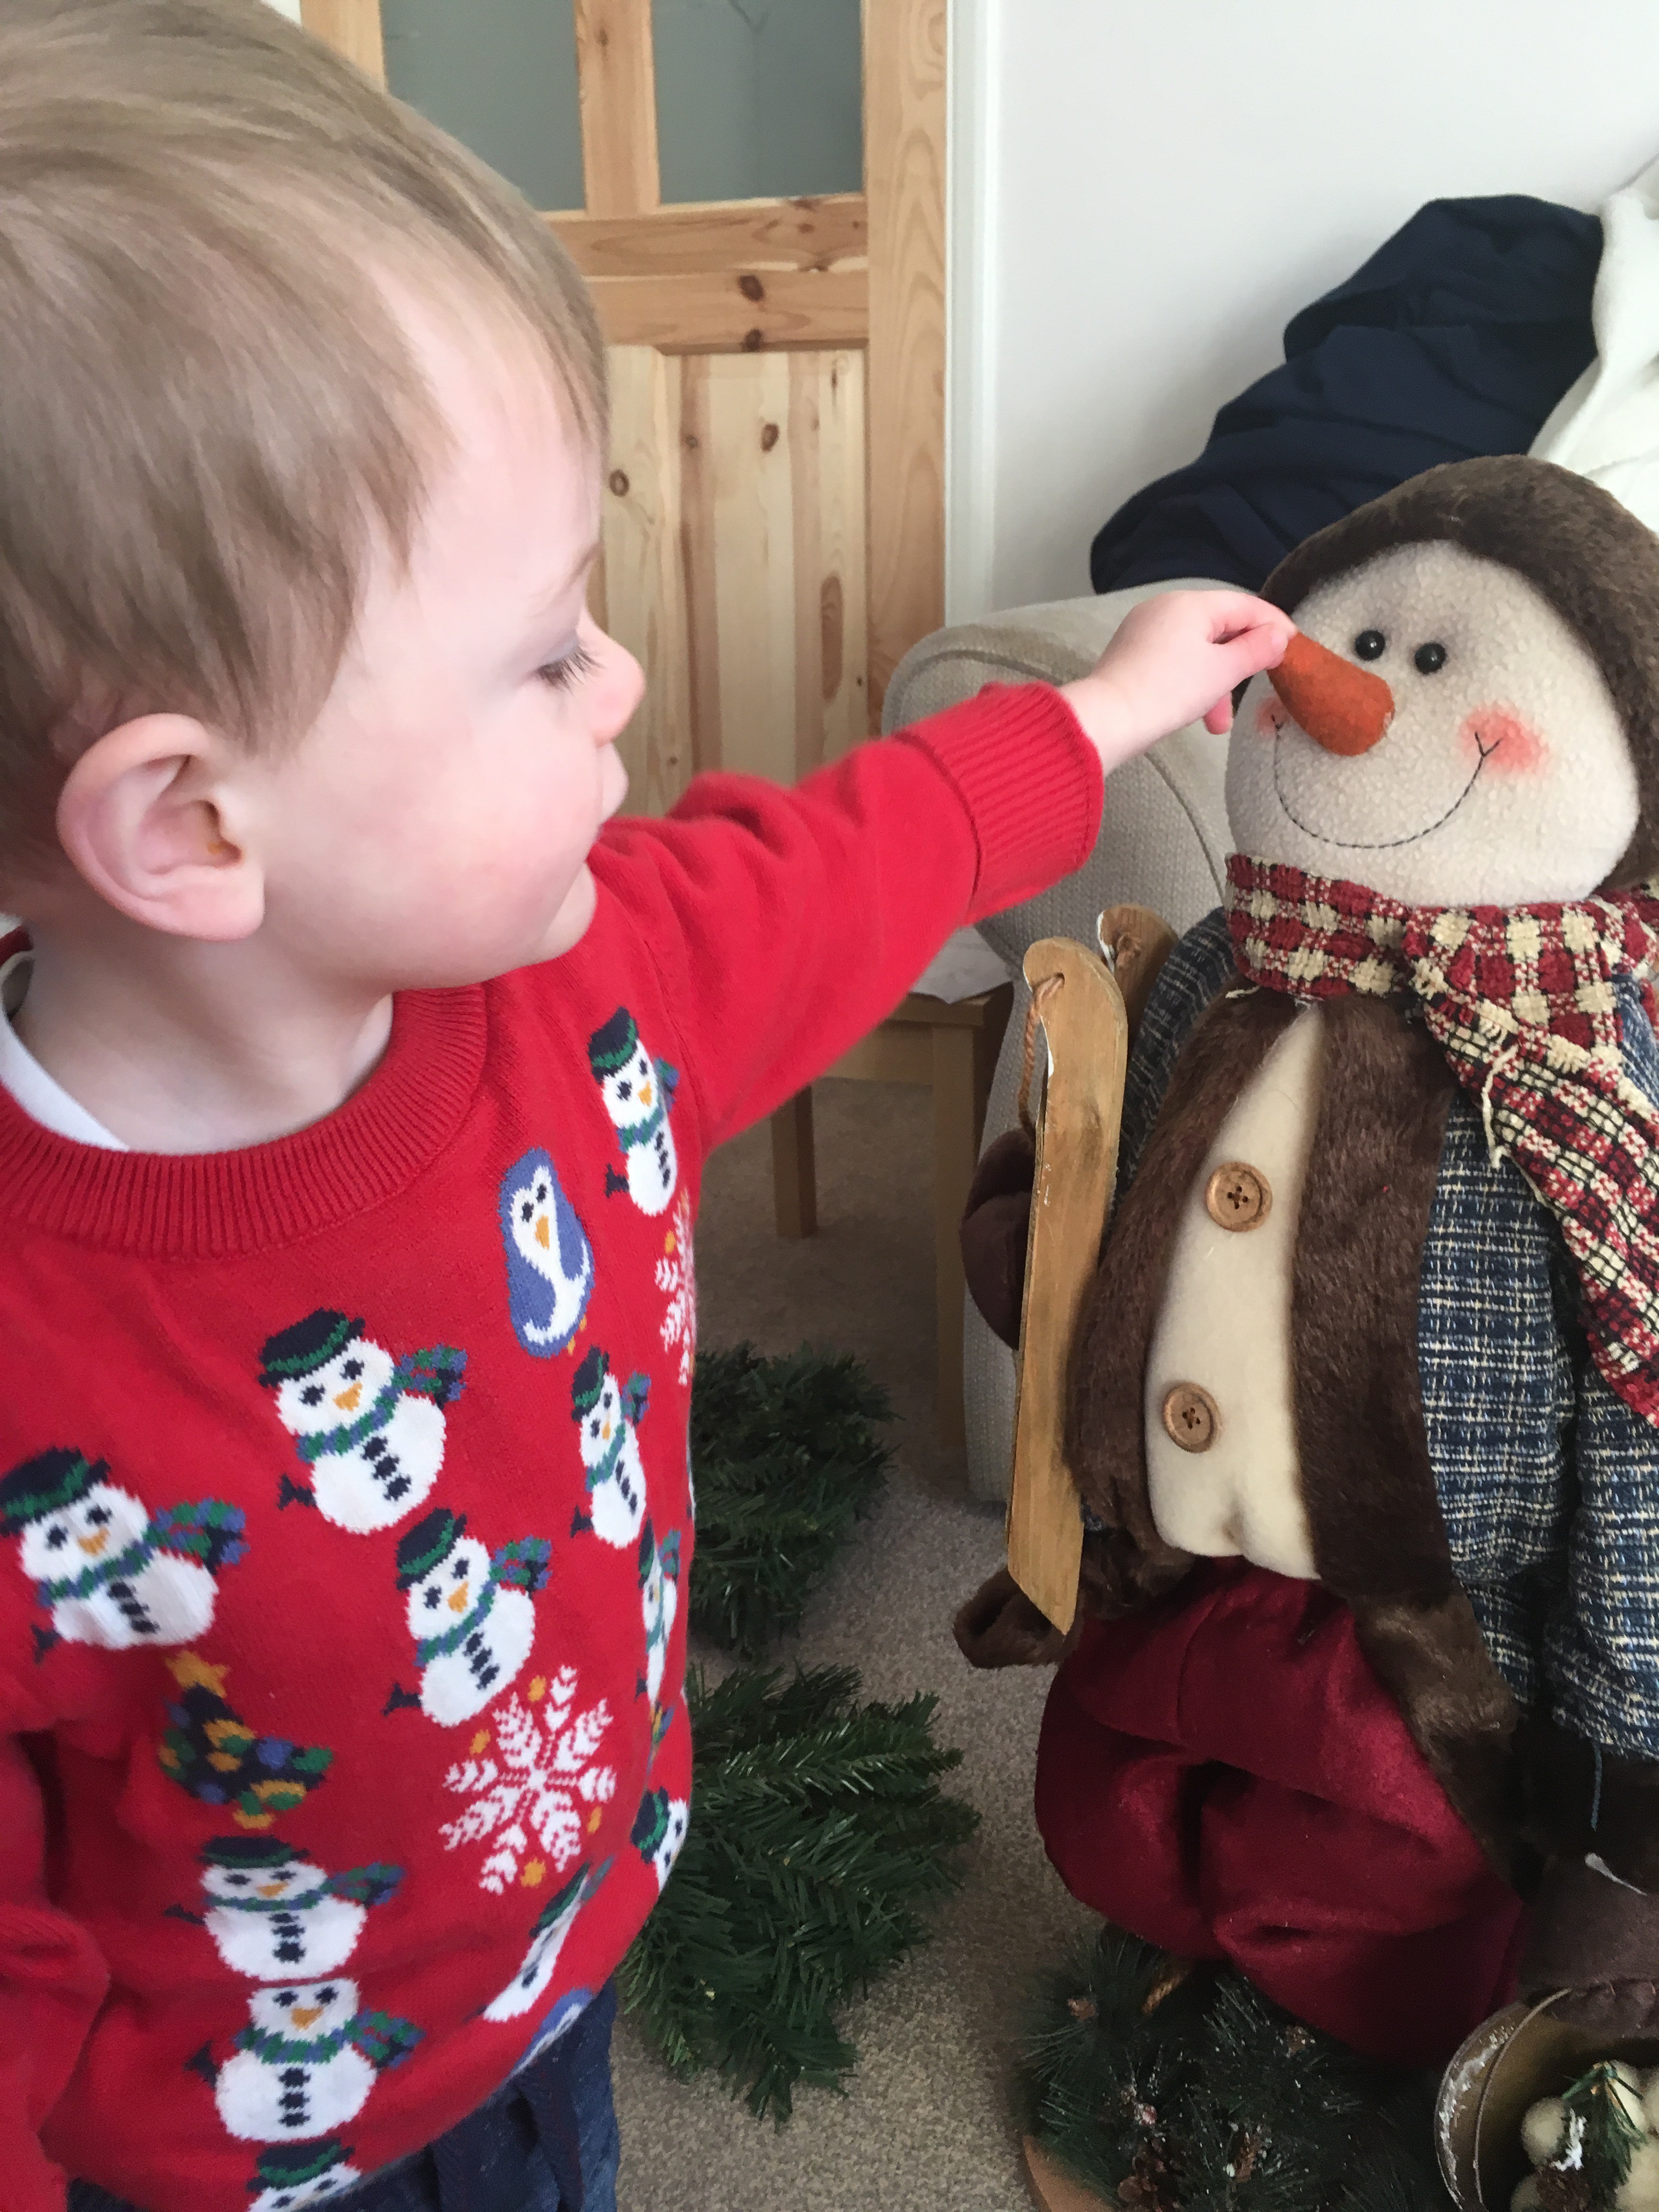 Toddler and snowman.